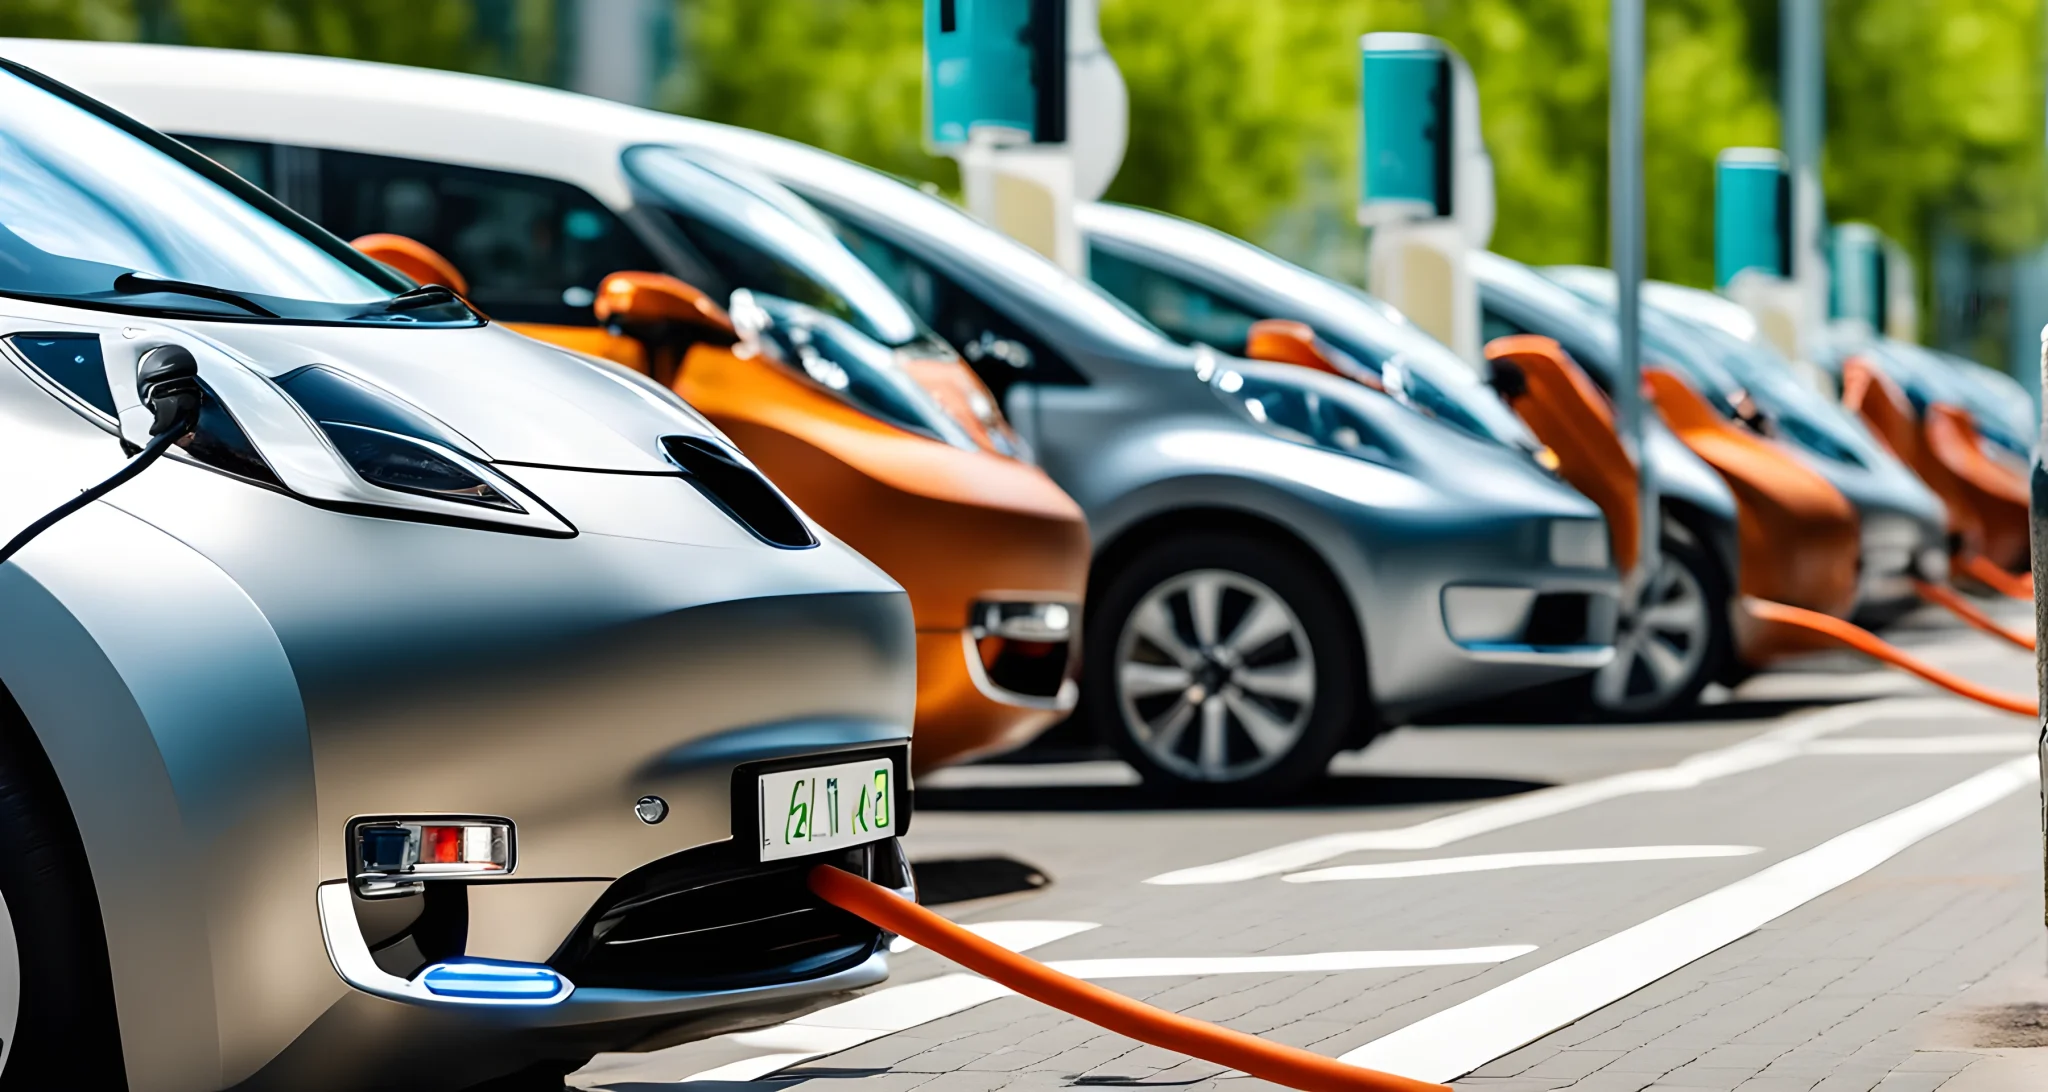 The image shows a row of electric vehicles charging at a charging station.